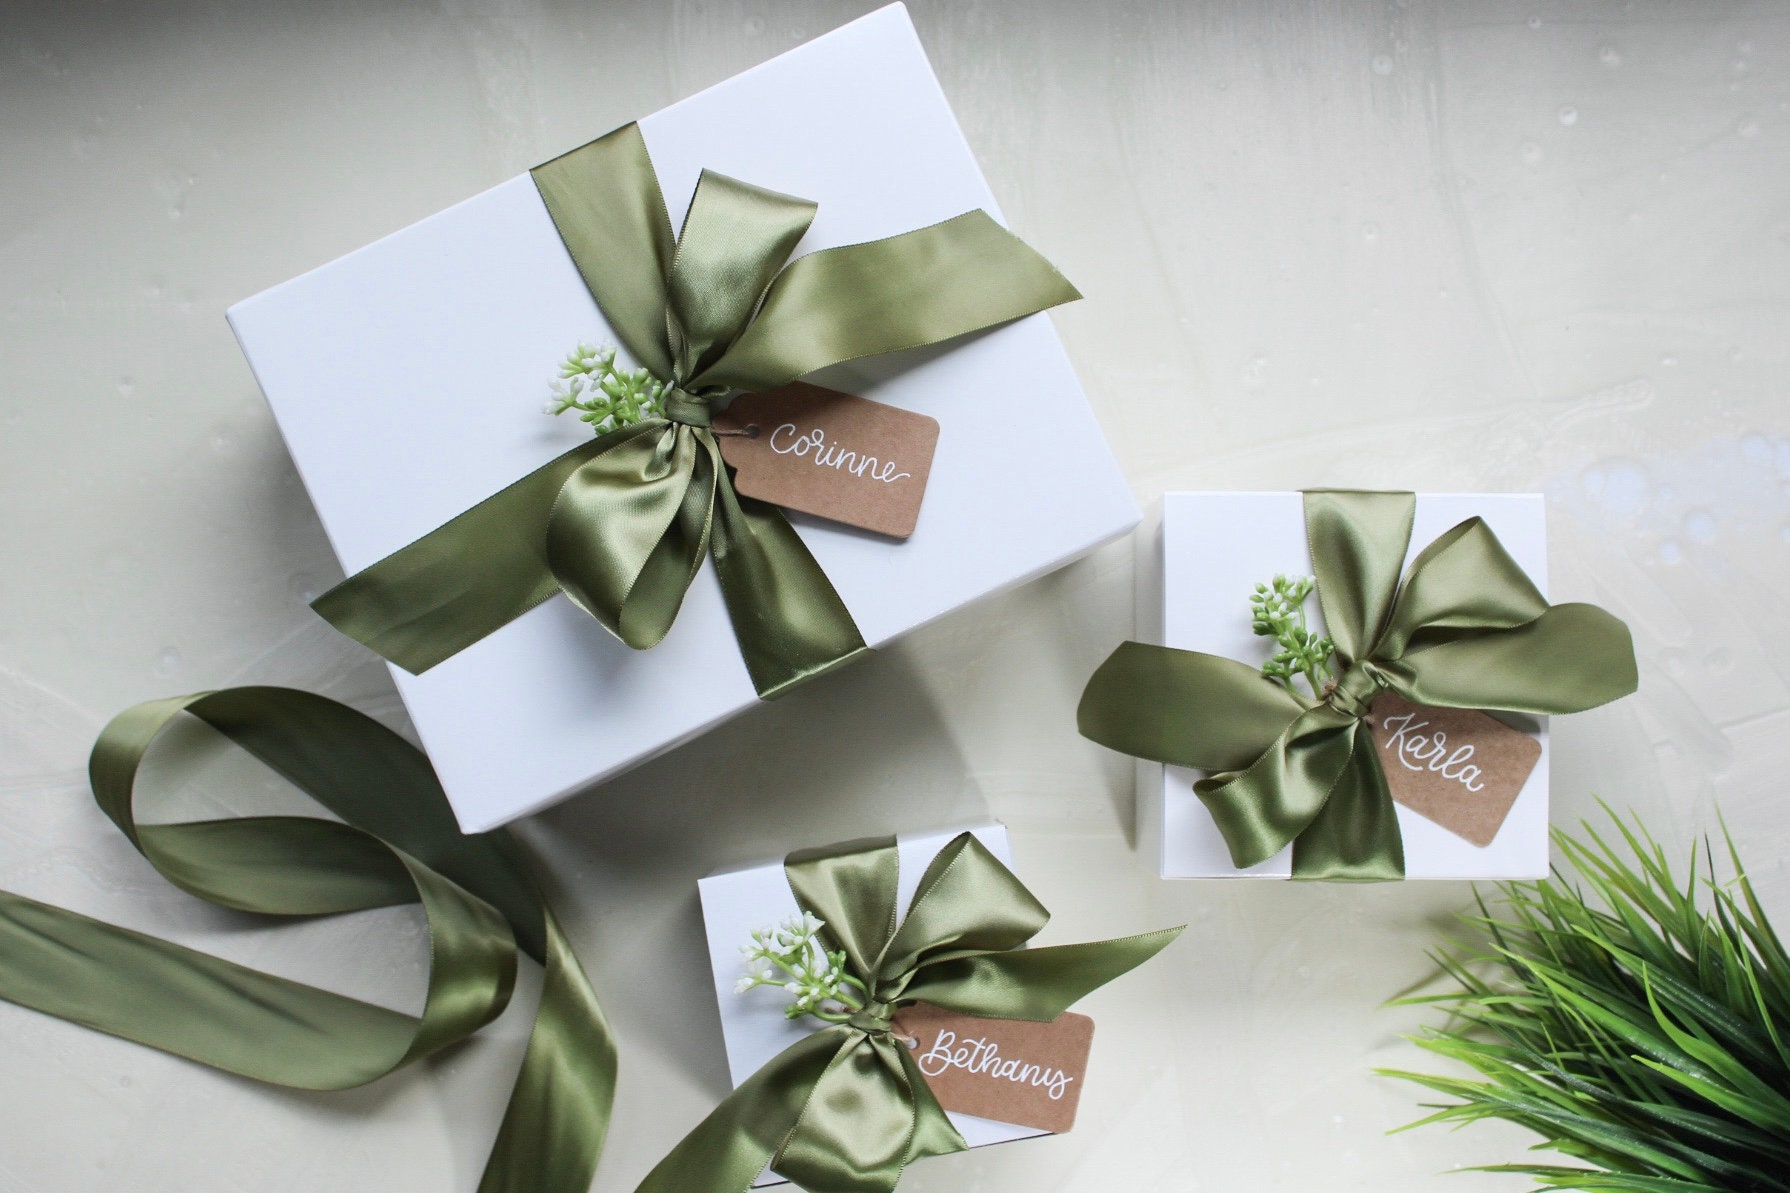 Gift Wrap Ribbon - The Buy Guide